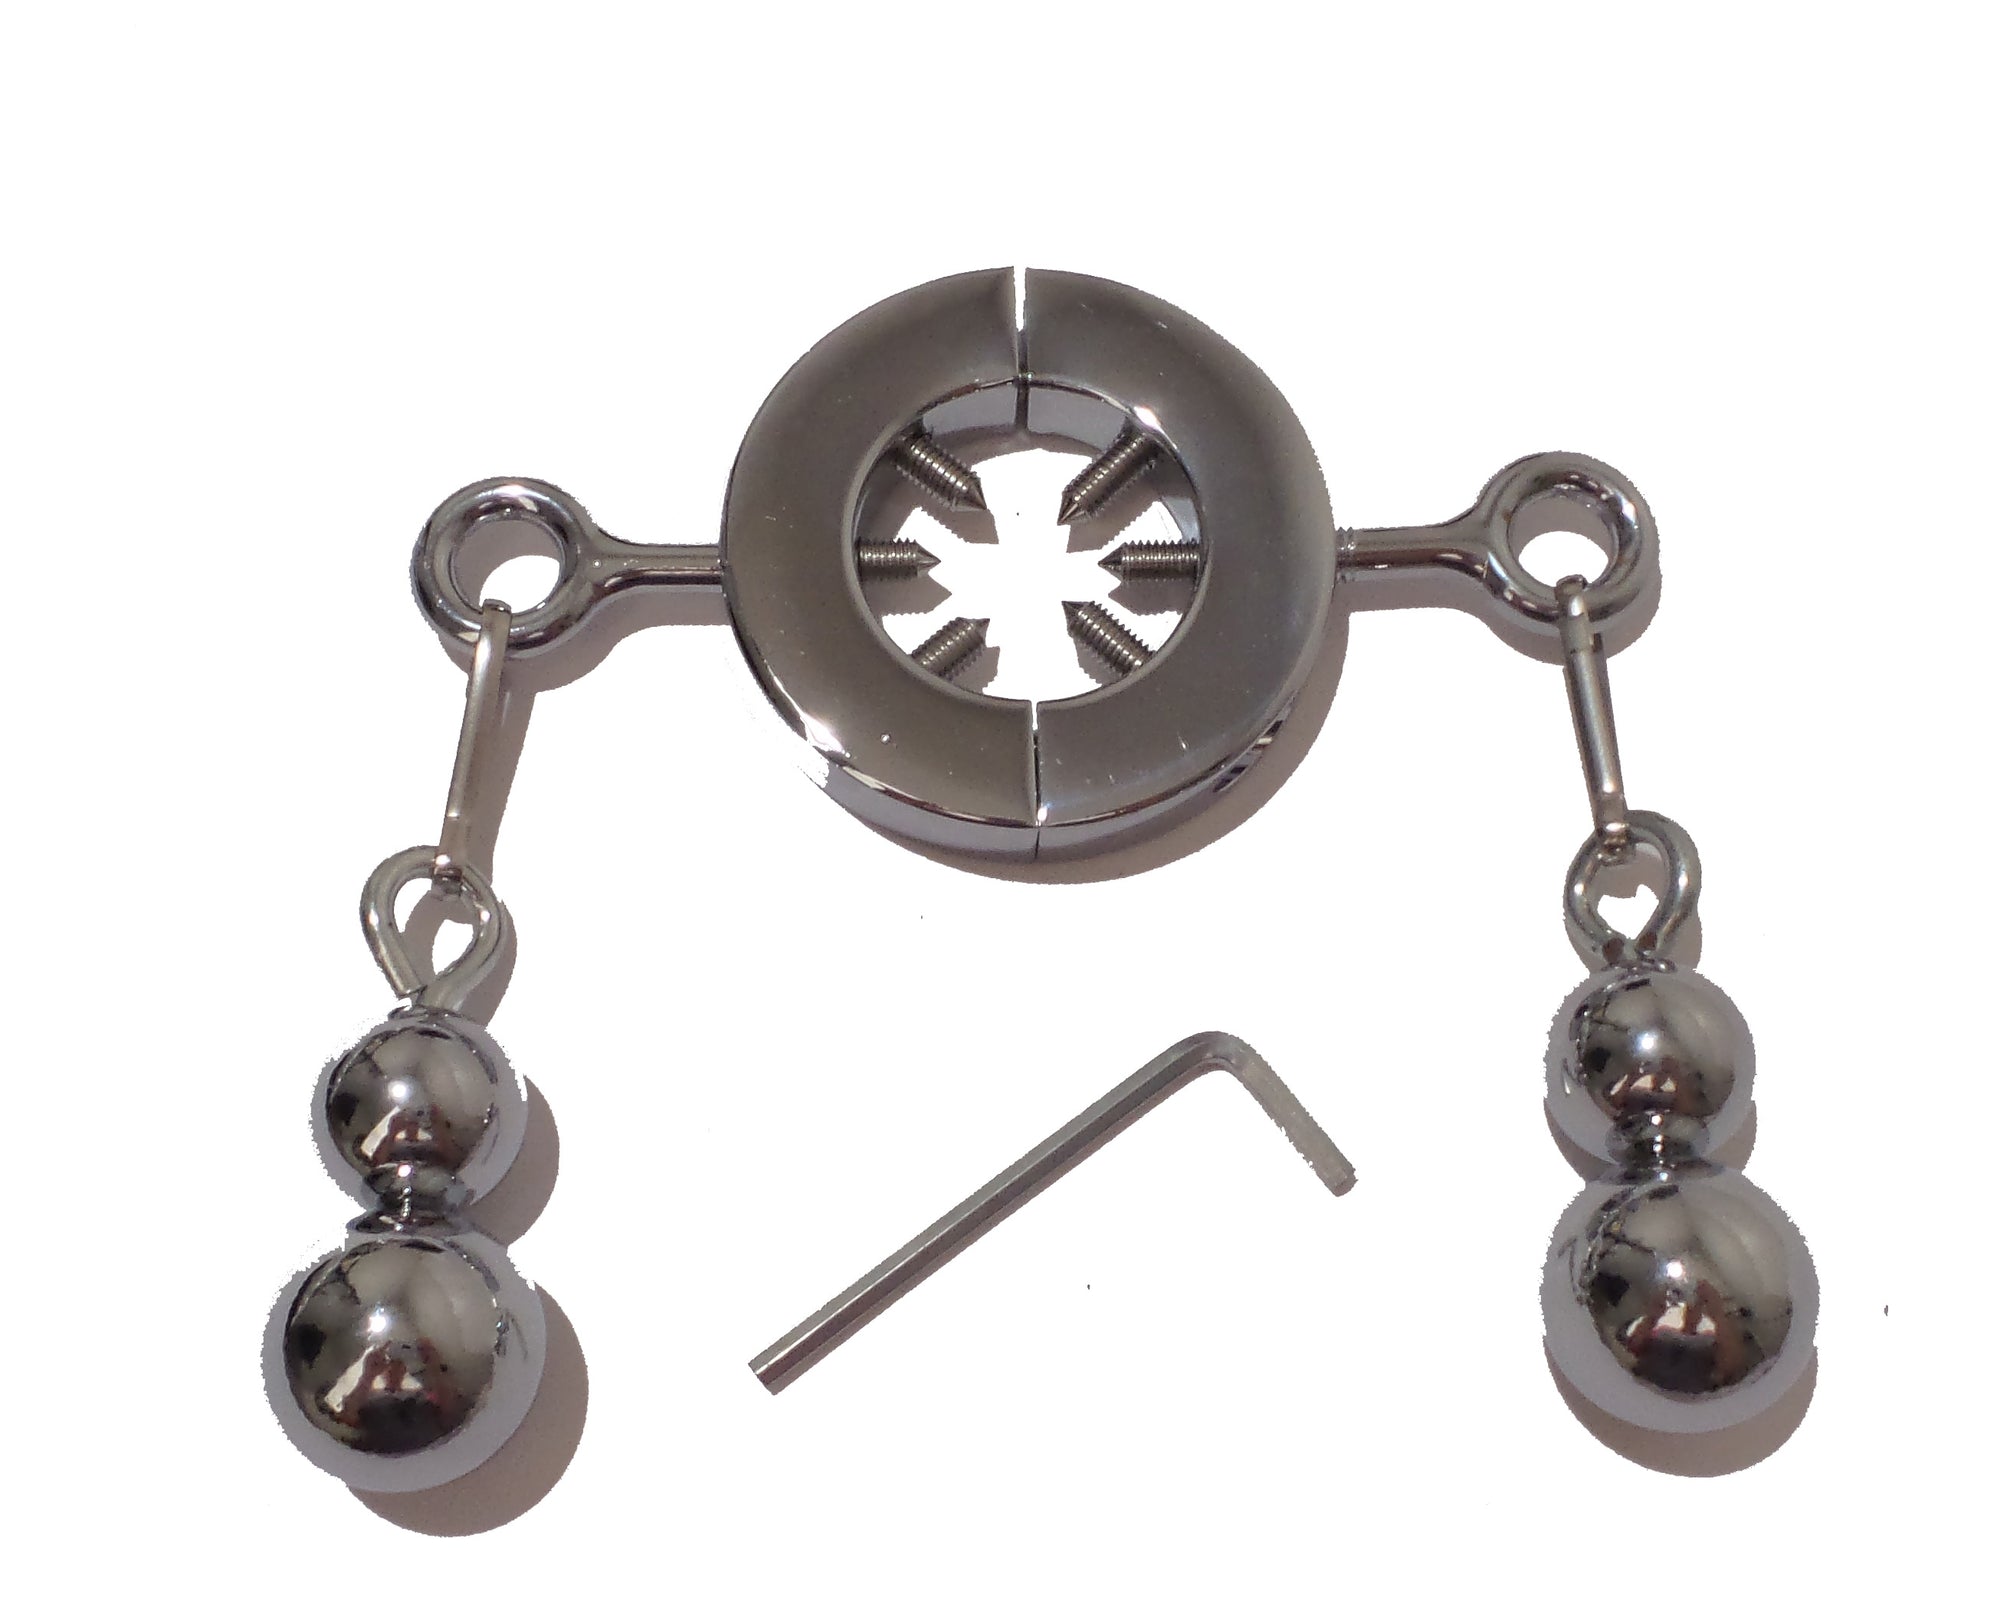 Buy the Magnetic Stainless Steel 40mm Ball Stretcher - XR Brands Master  Series